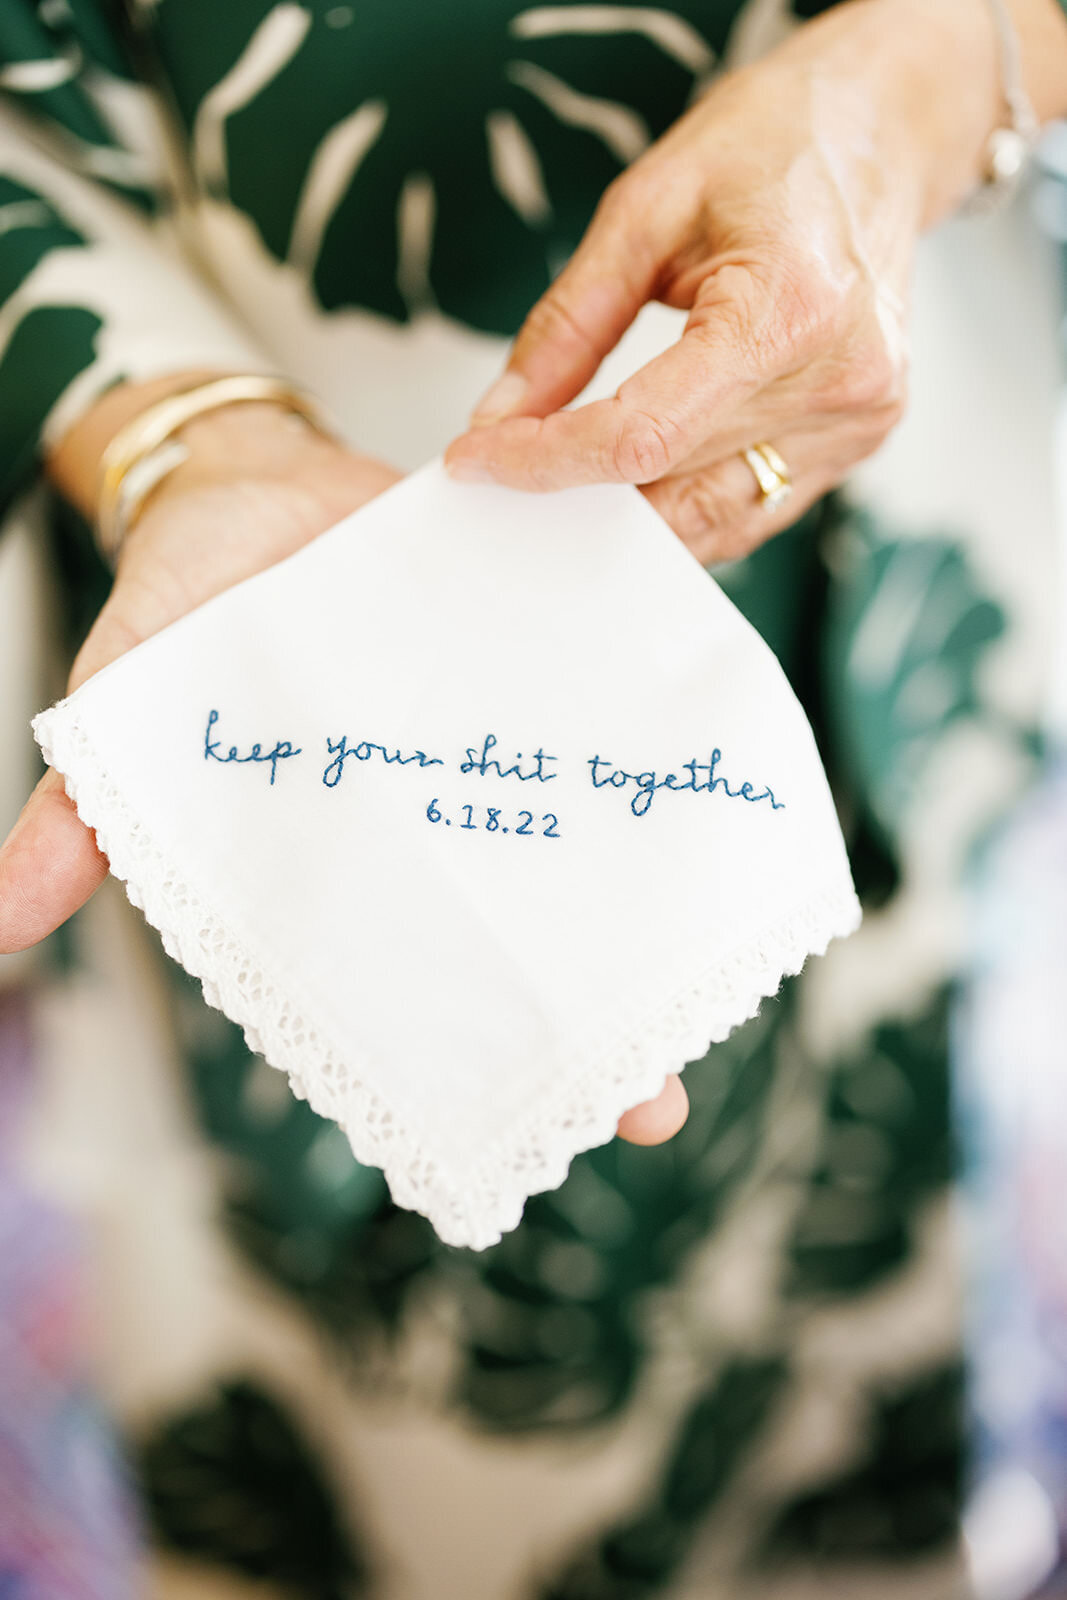 Small napkin embroidered with 'keep your shit together'